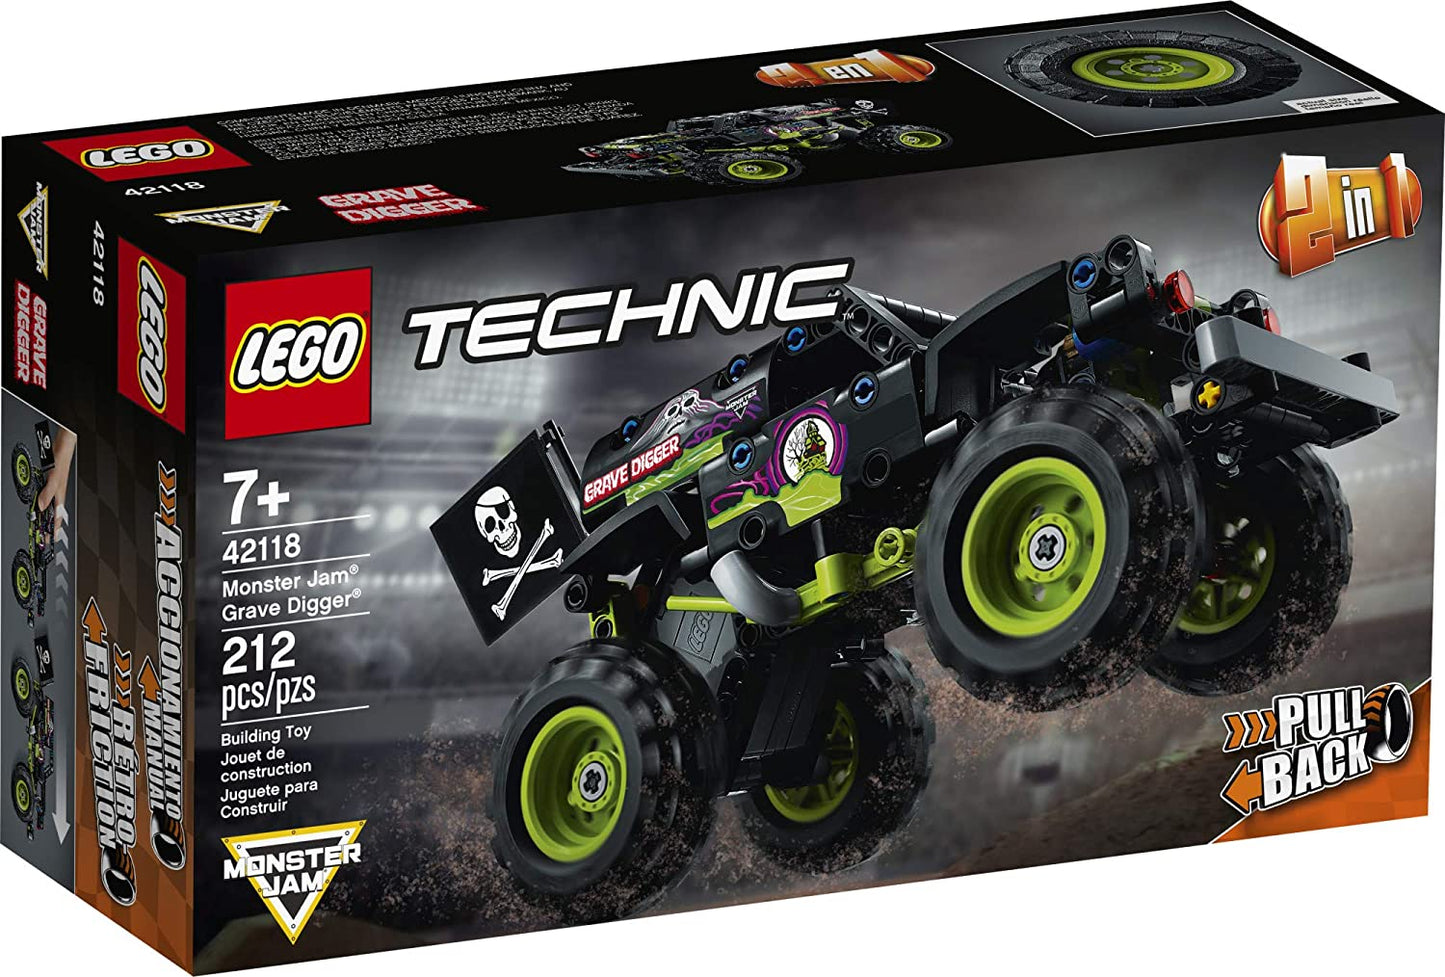 LEGO Technic Monster Jam Grave Digger 42118 Model Building Kit for Boys and Girls Who Love Monster Truck Toys, New 2021 (212 Pieces)